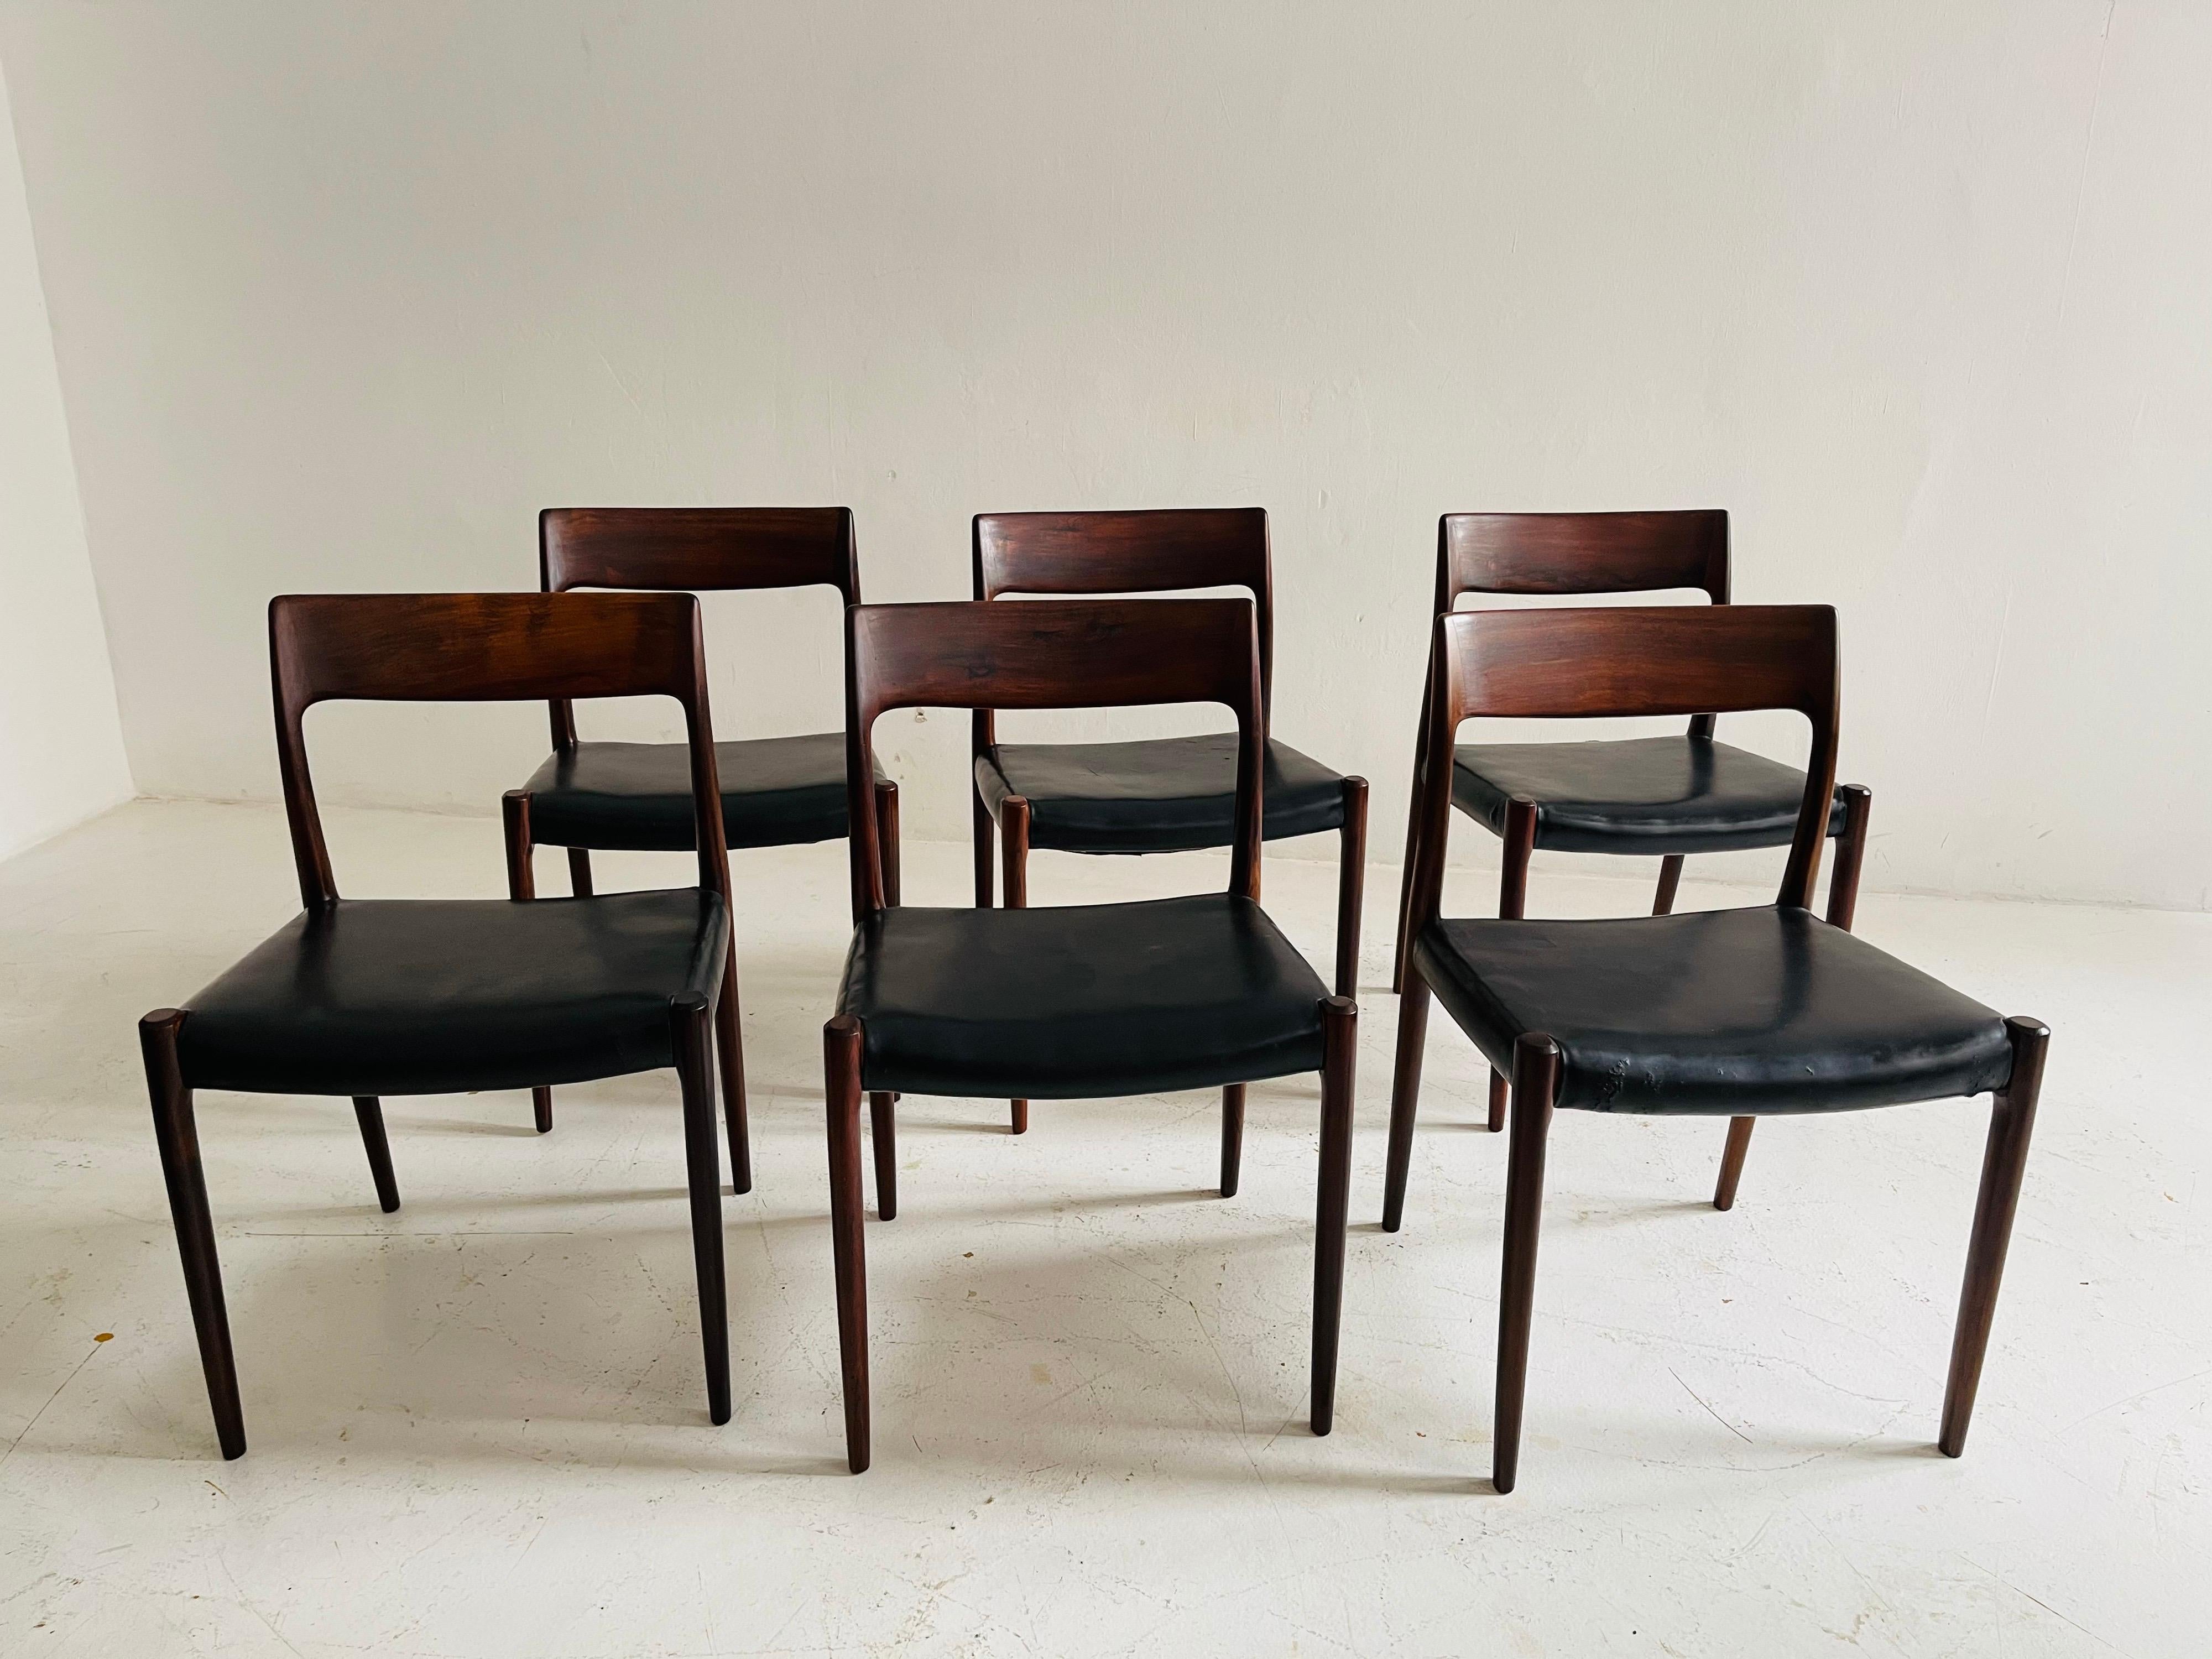 Niels O. Møller dining chairs no 77 set of six by Møllers Møbelfabrik in Denmark. Original patinated leather seats.